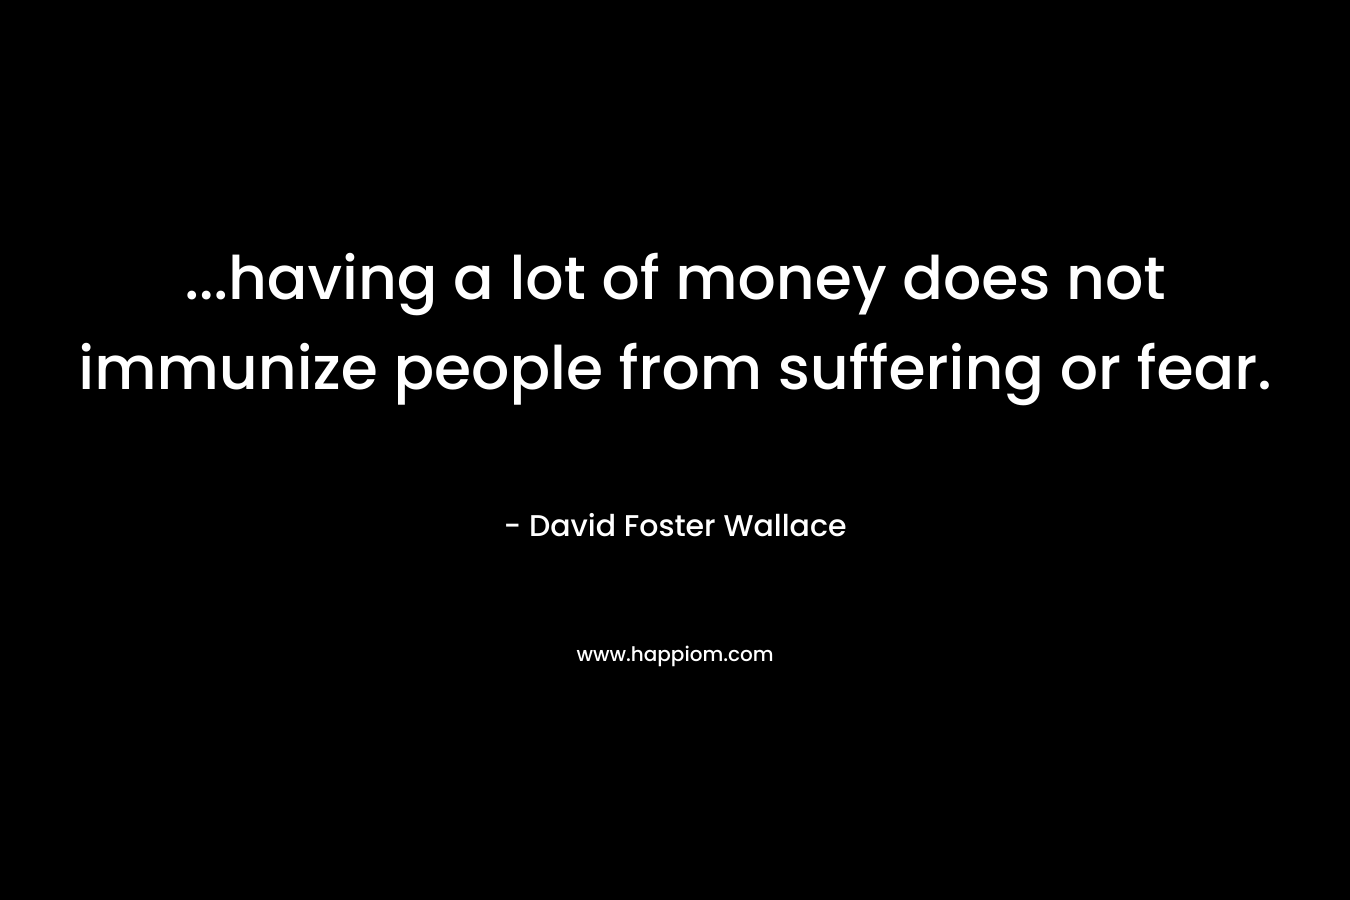 ...having a lot of money does not immunize people from suffering or fear.